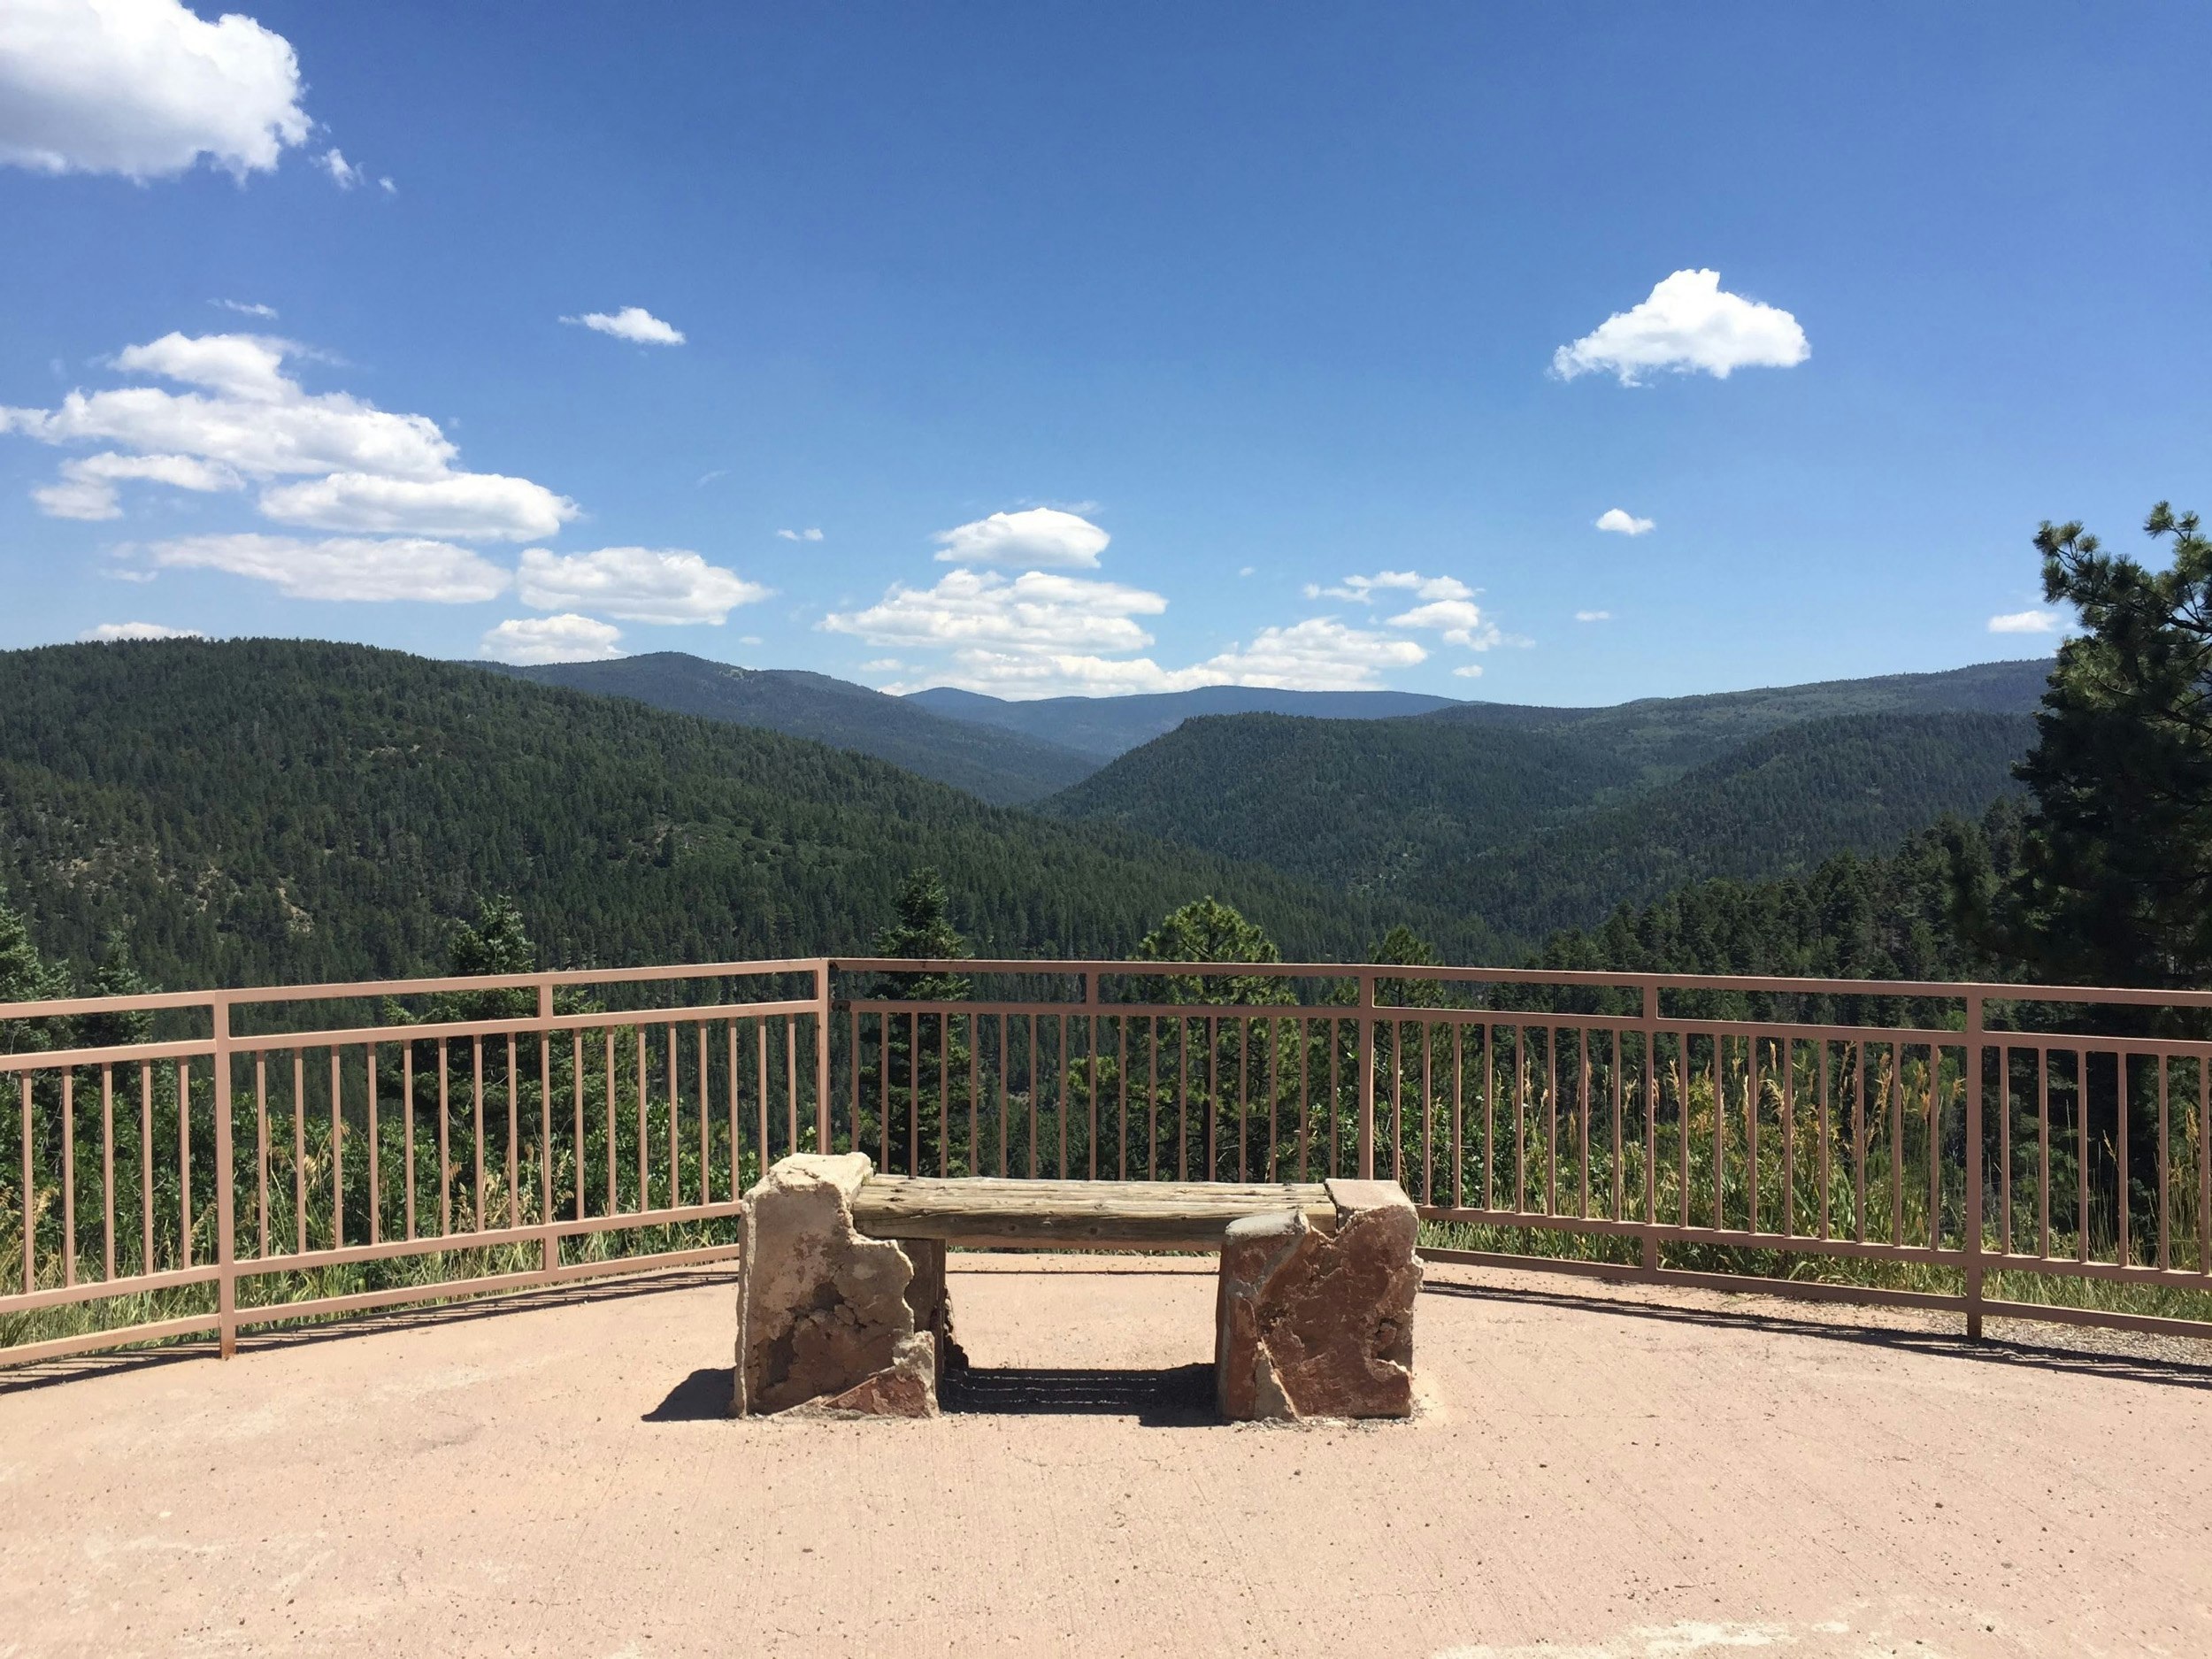 A bench is set up in front of a railing looking out over a southwestern vista on the High Road to Taos